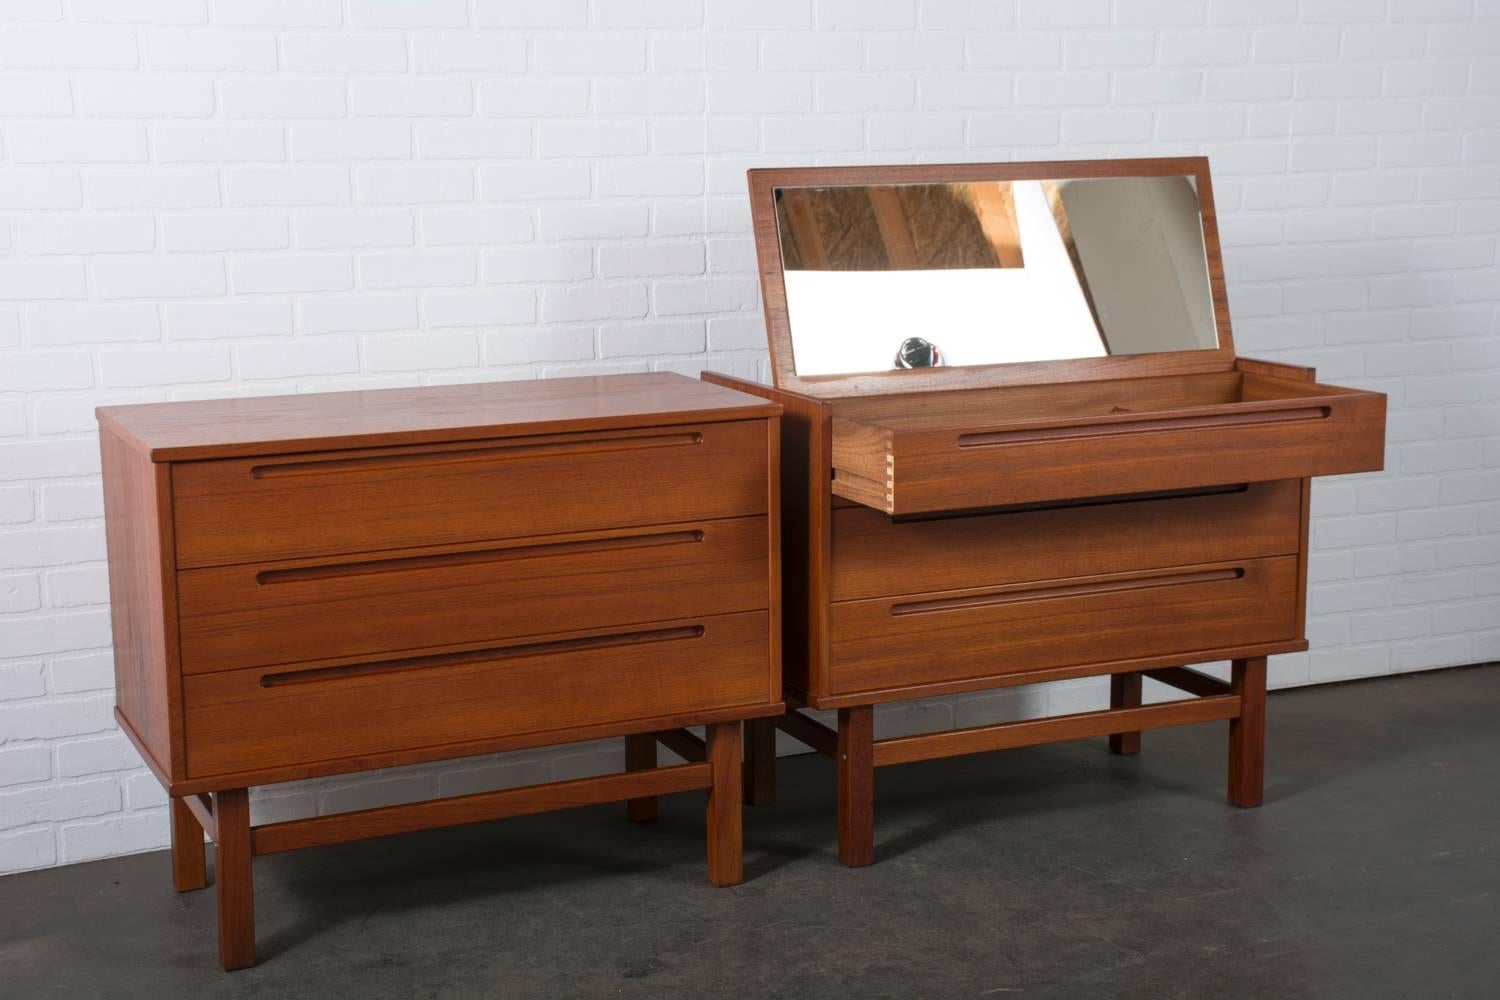 This Danish modern teak dresser and vanity were designed by Nils Jonsson for Torring Mobelfabrik and produced by HJN Mobler, Denmark, circa 1960s. This set features one three drawer dresser and one vanity with two drawers below. What appears to be